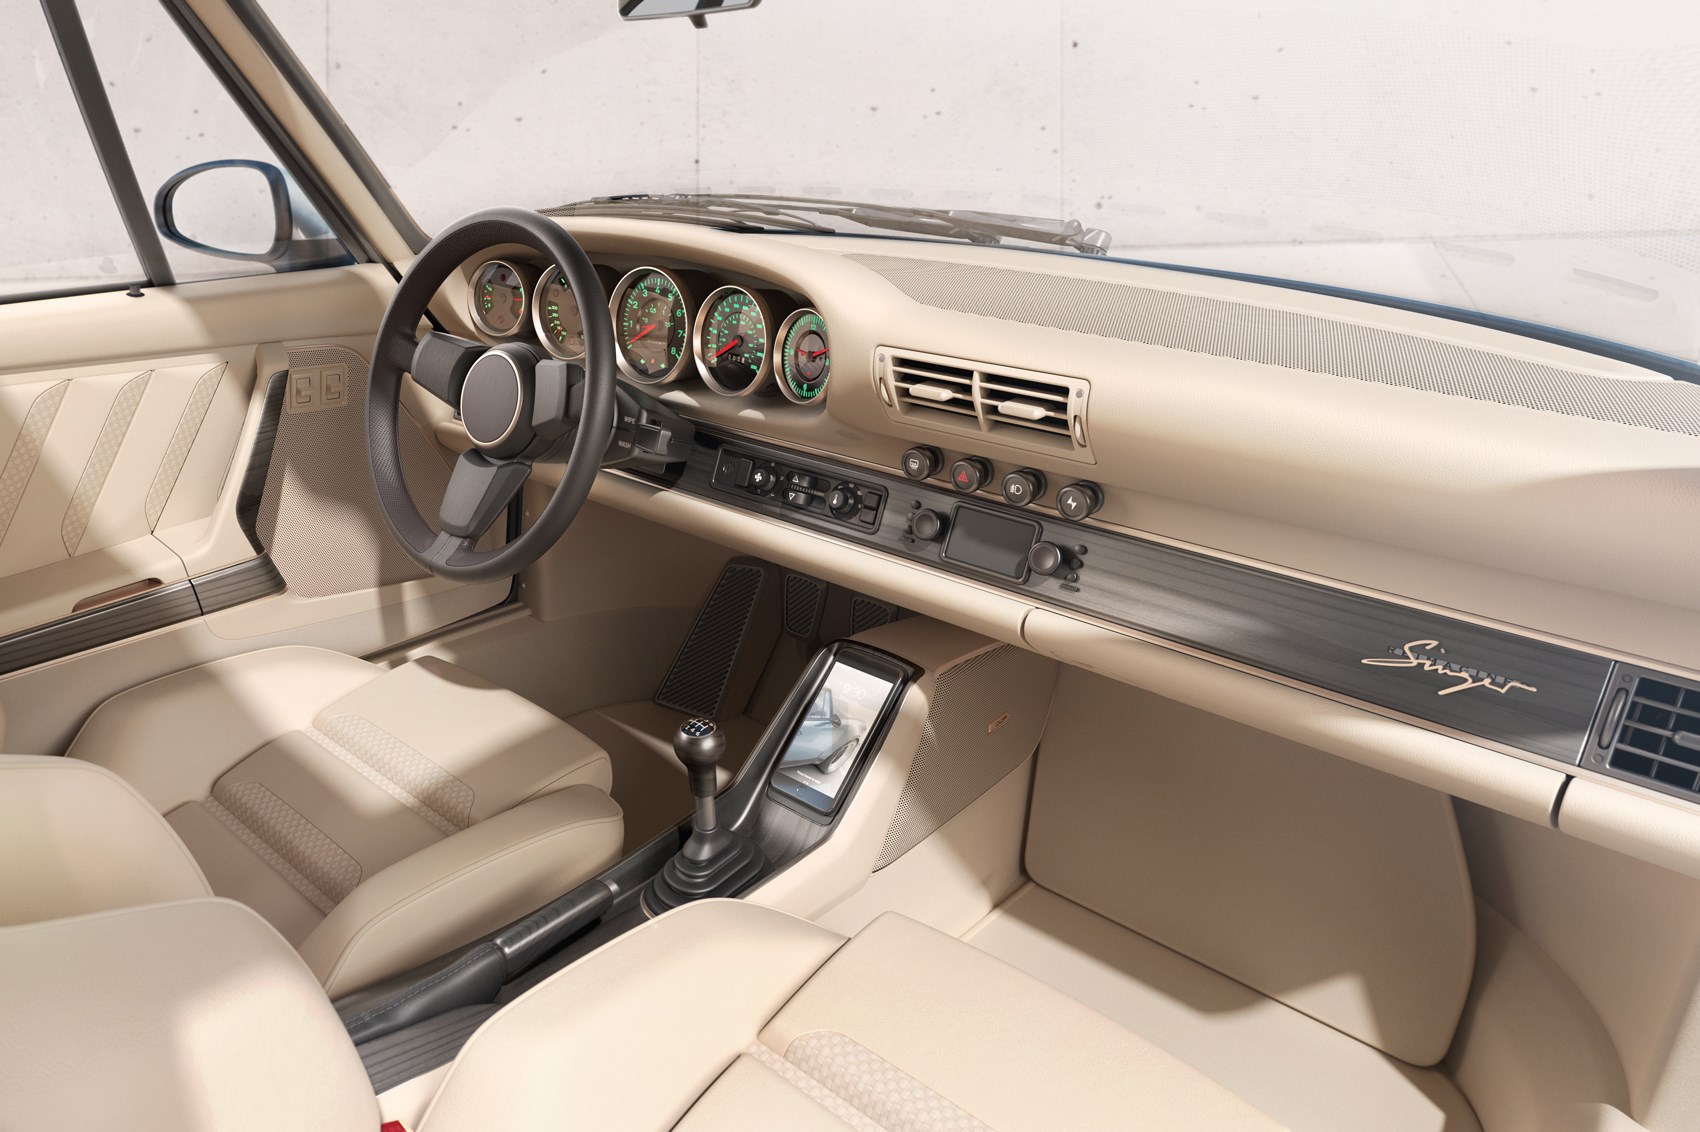 100+ Impossibly Beautiful Singer Porsche Interiors